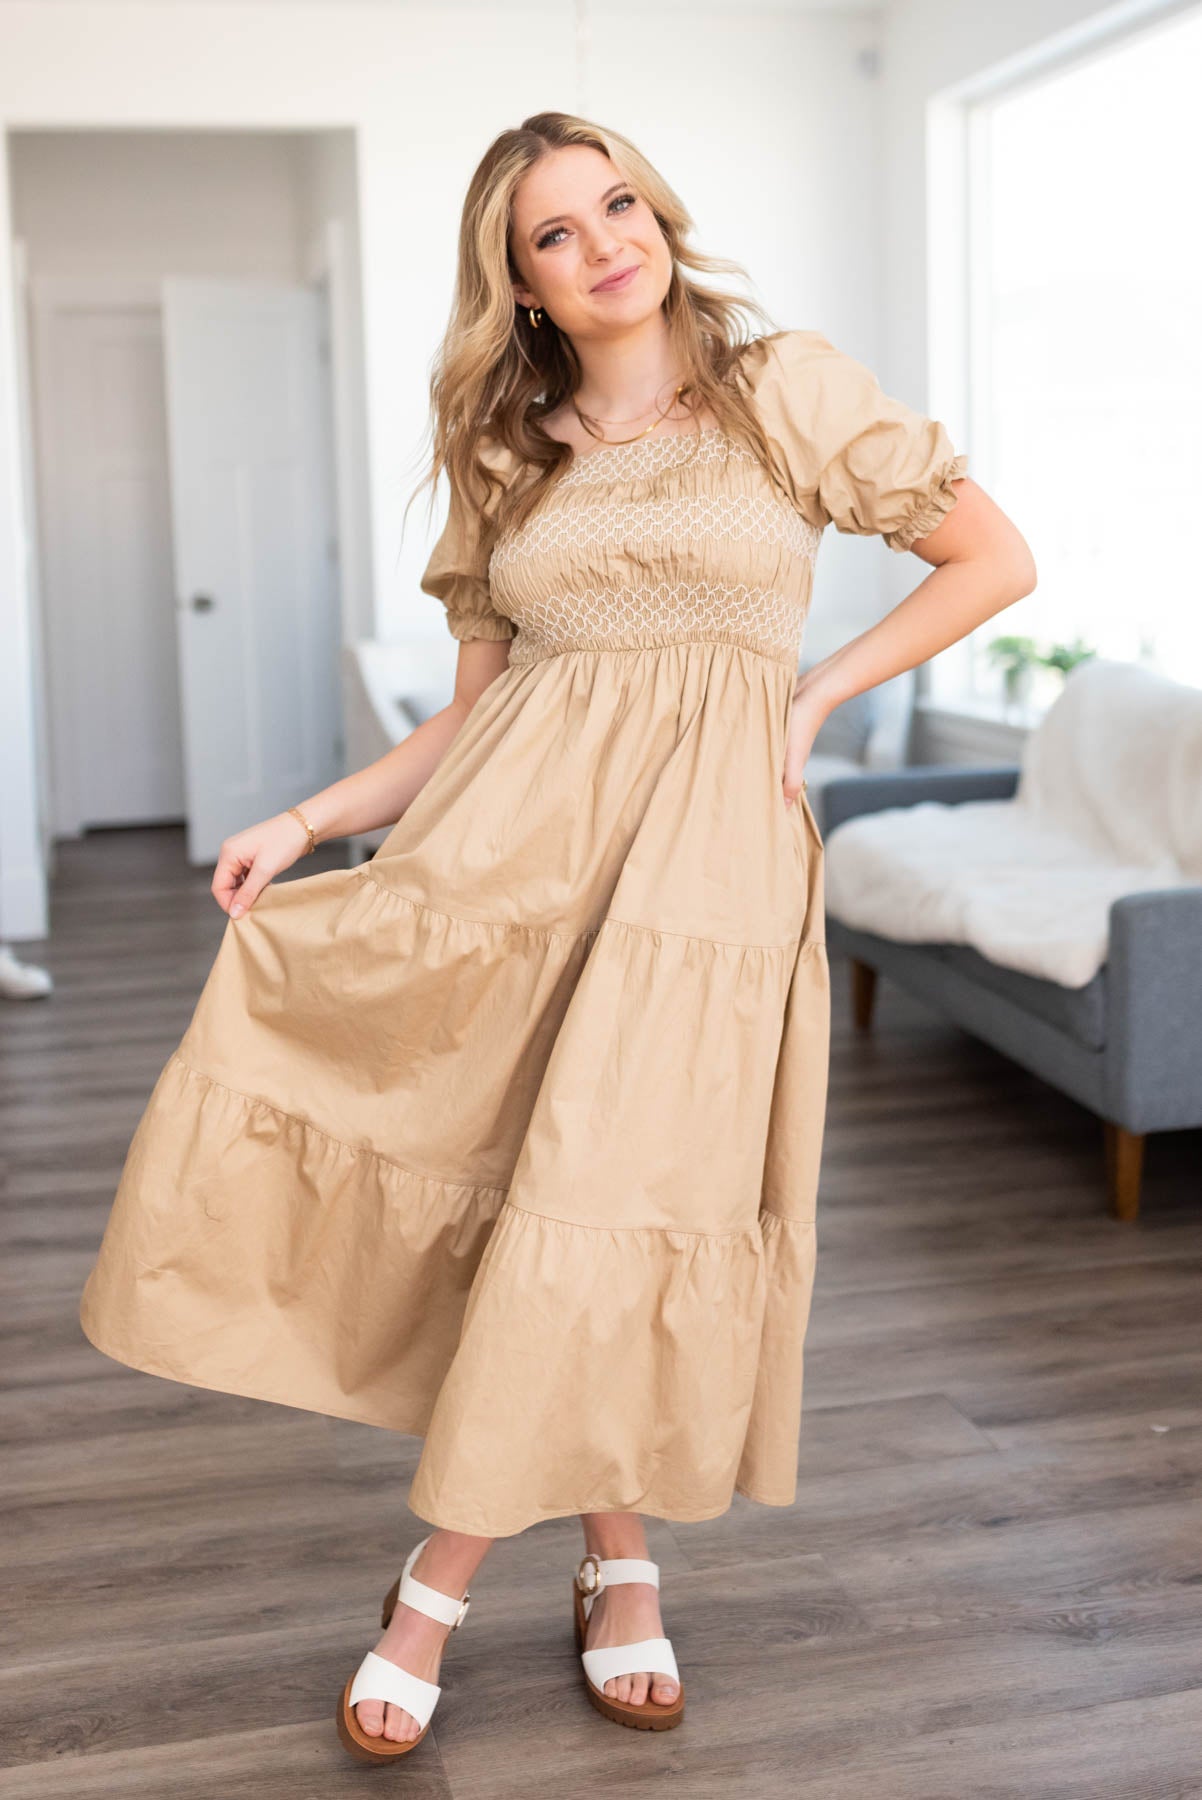 Short sleeve taupe dress with tiered skirt